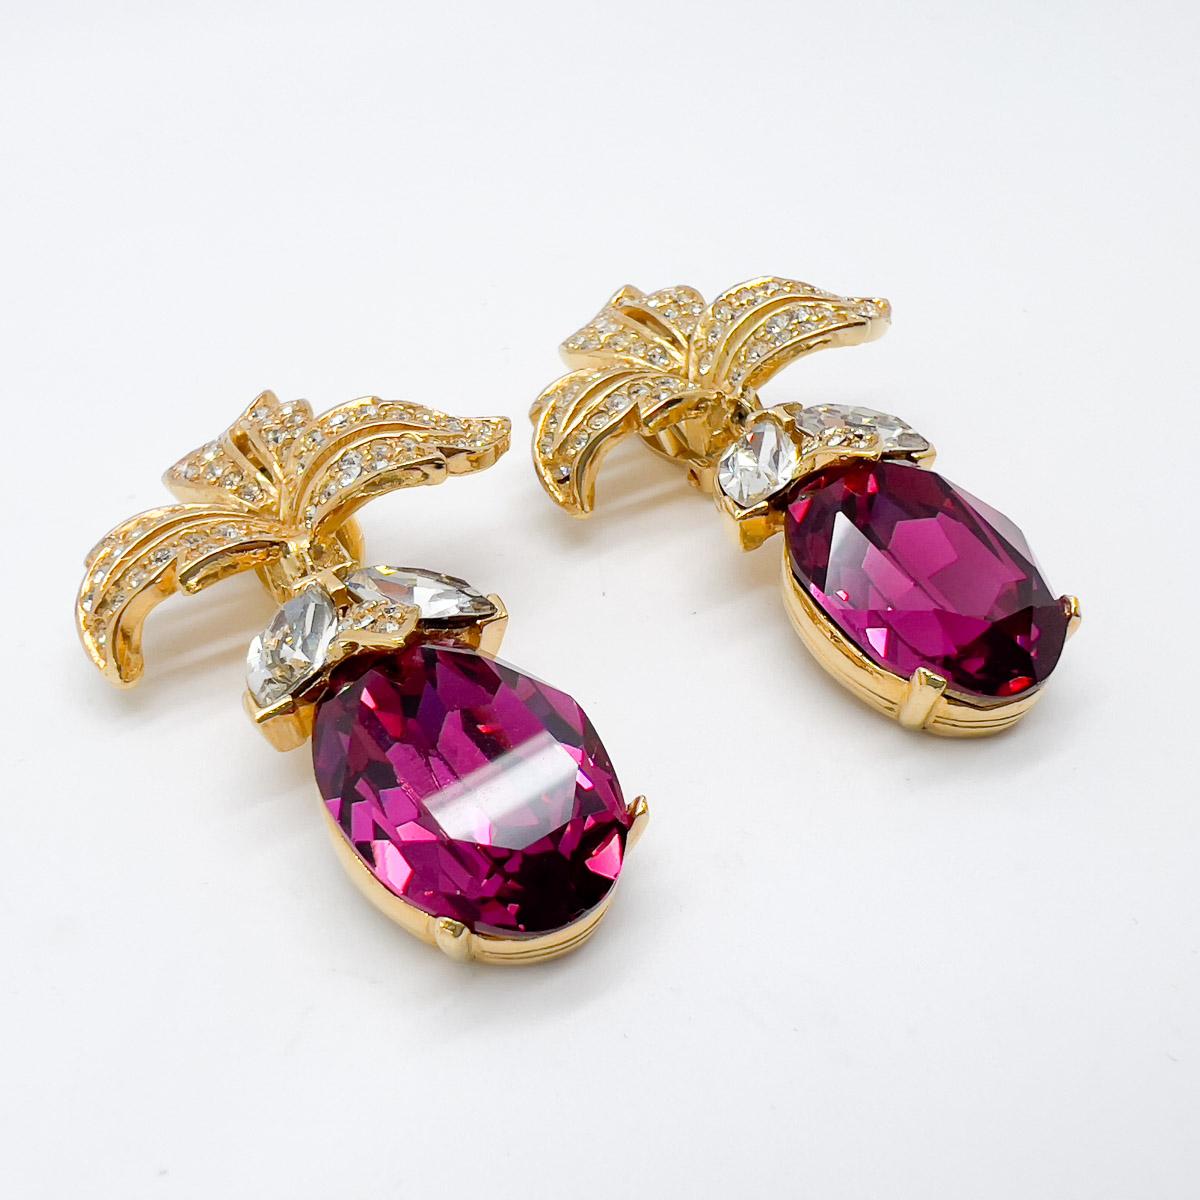 Vintage Ciner Hot Pink Crystal Floral Earrings 1980s In Good Condition For Sale In Wilmslow, GB